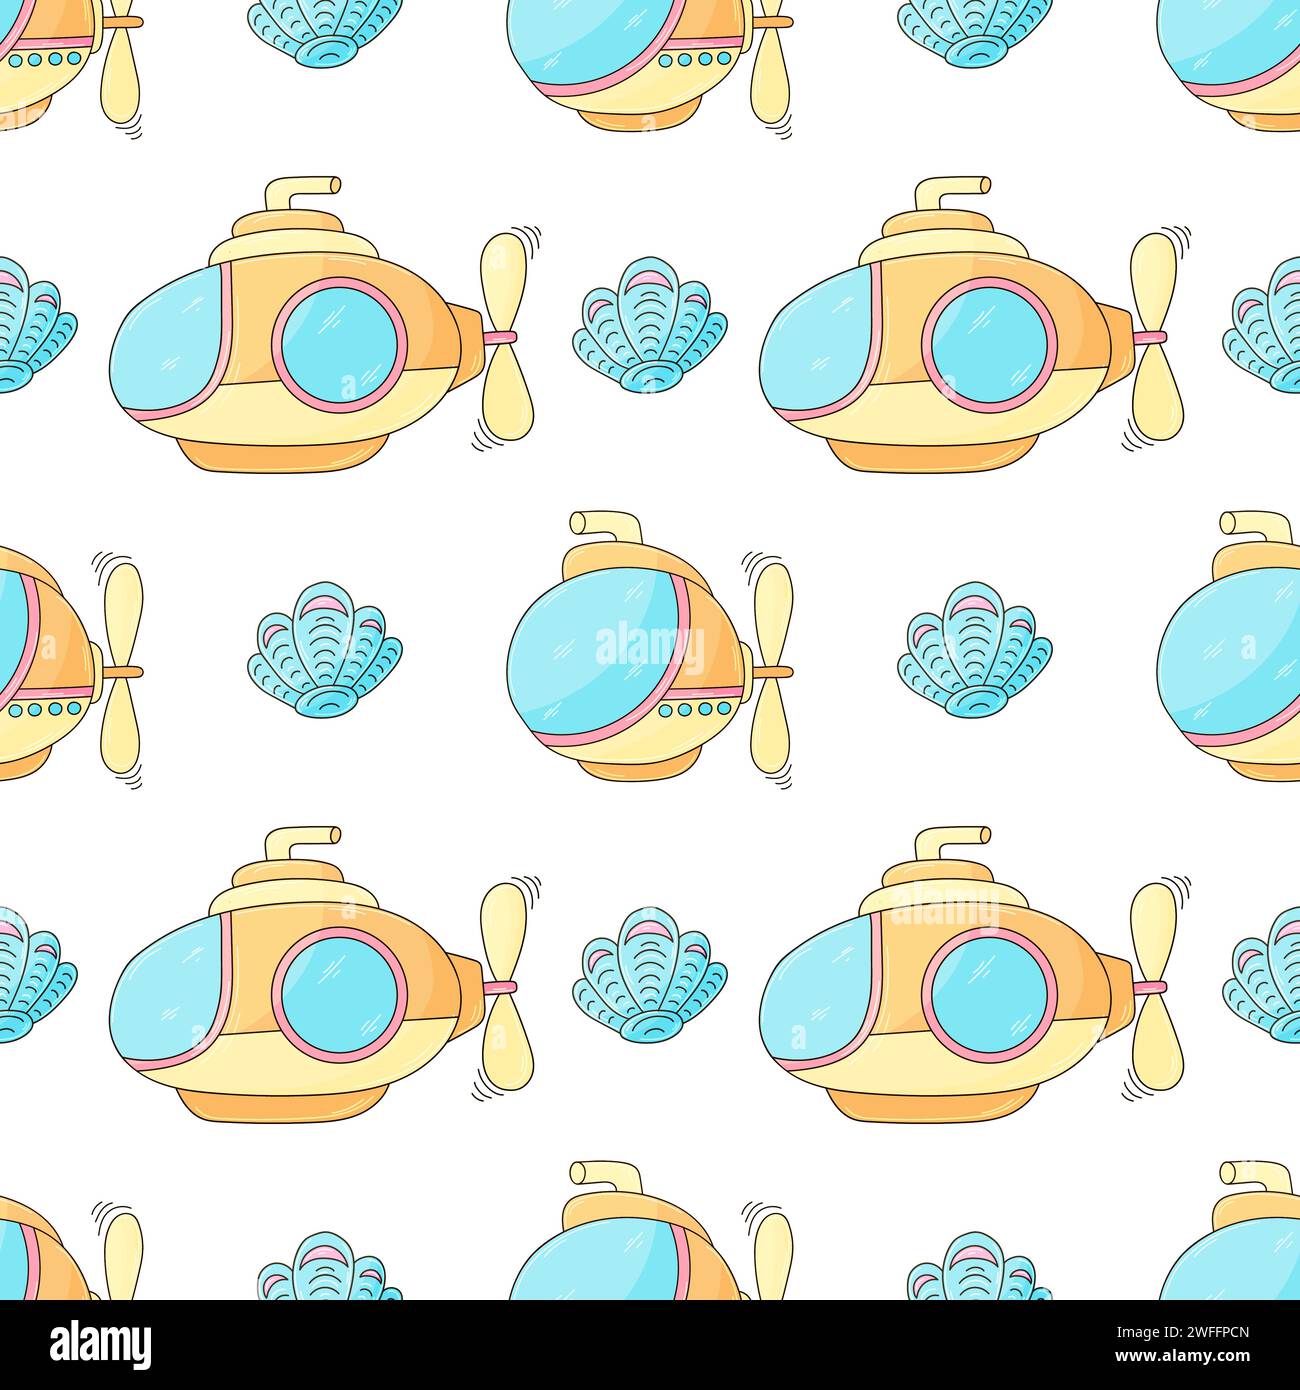 Marine seamless pattern. Submarines. Children's cute hand drawings. Can be used for fabric Stock Vector